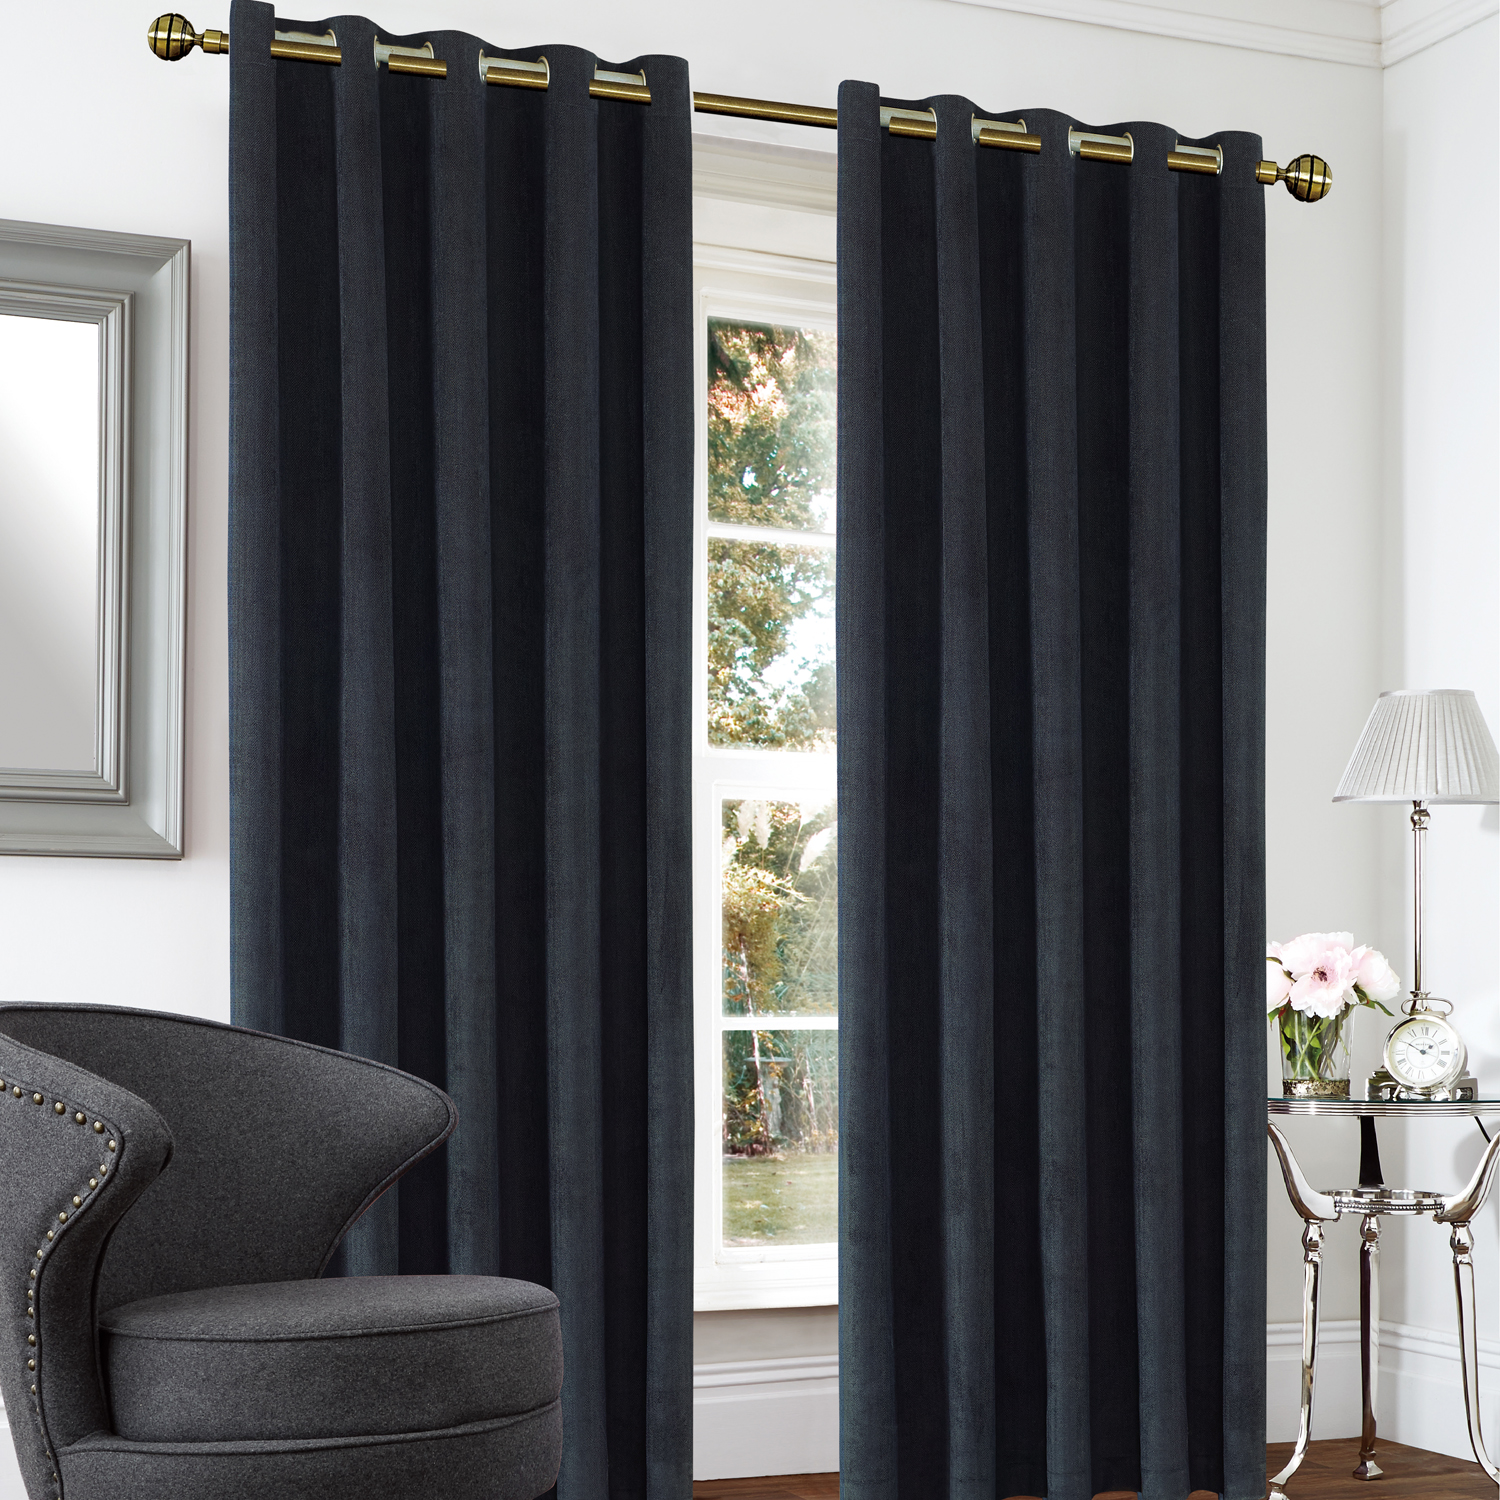 Blackout & Thermal Herringbone Curtains - Home Store + More